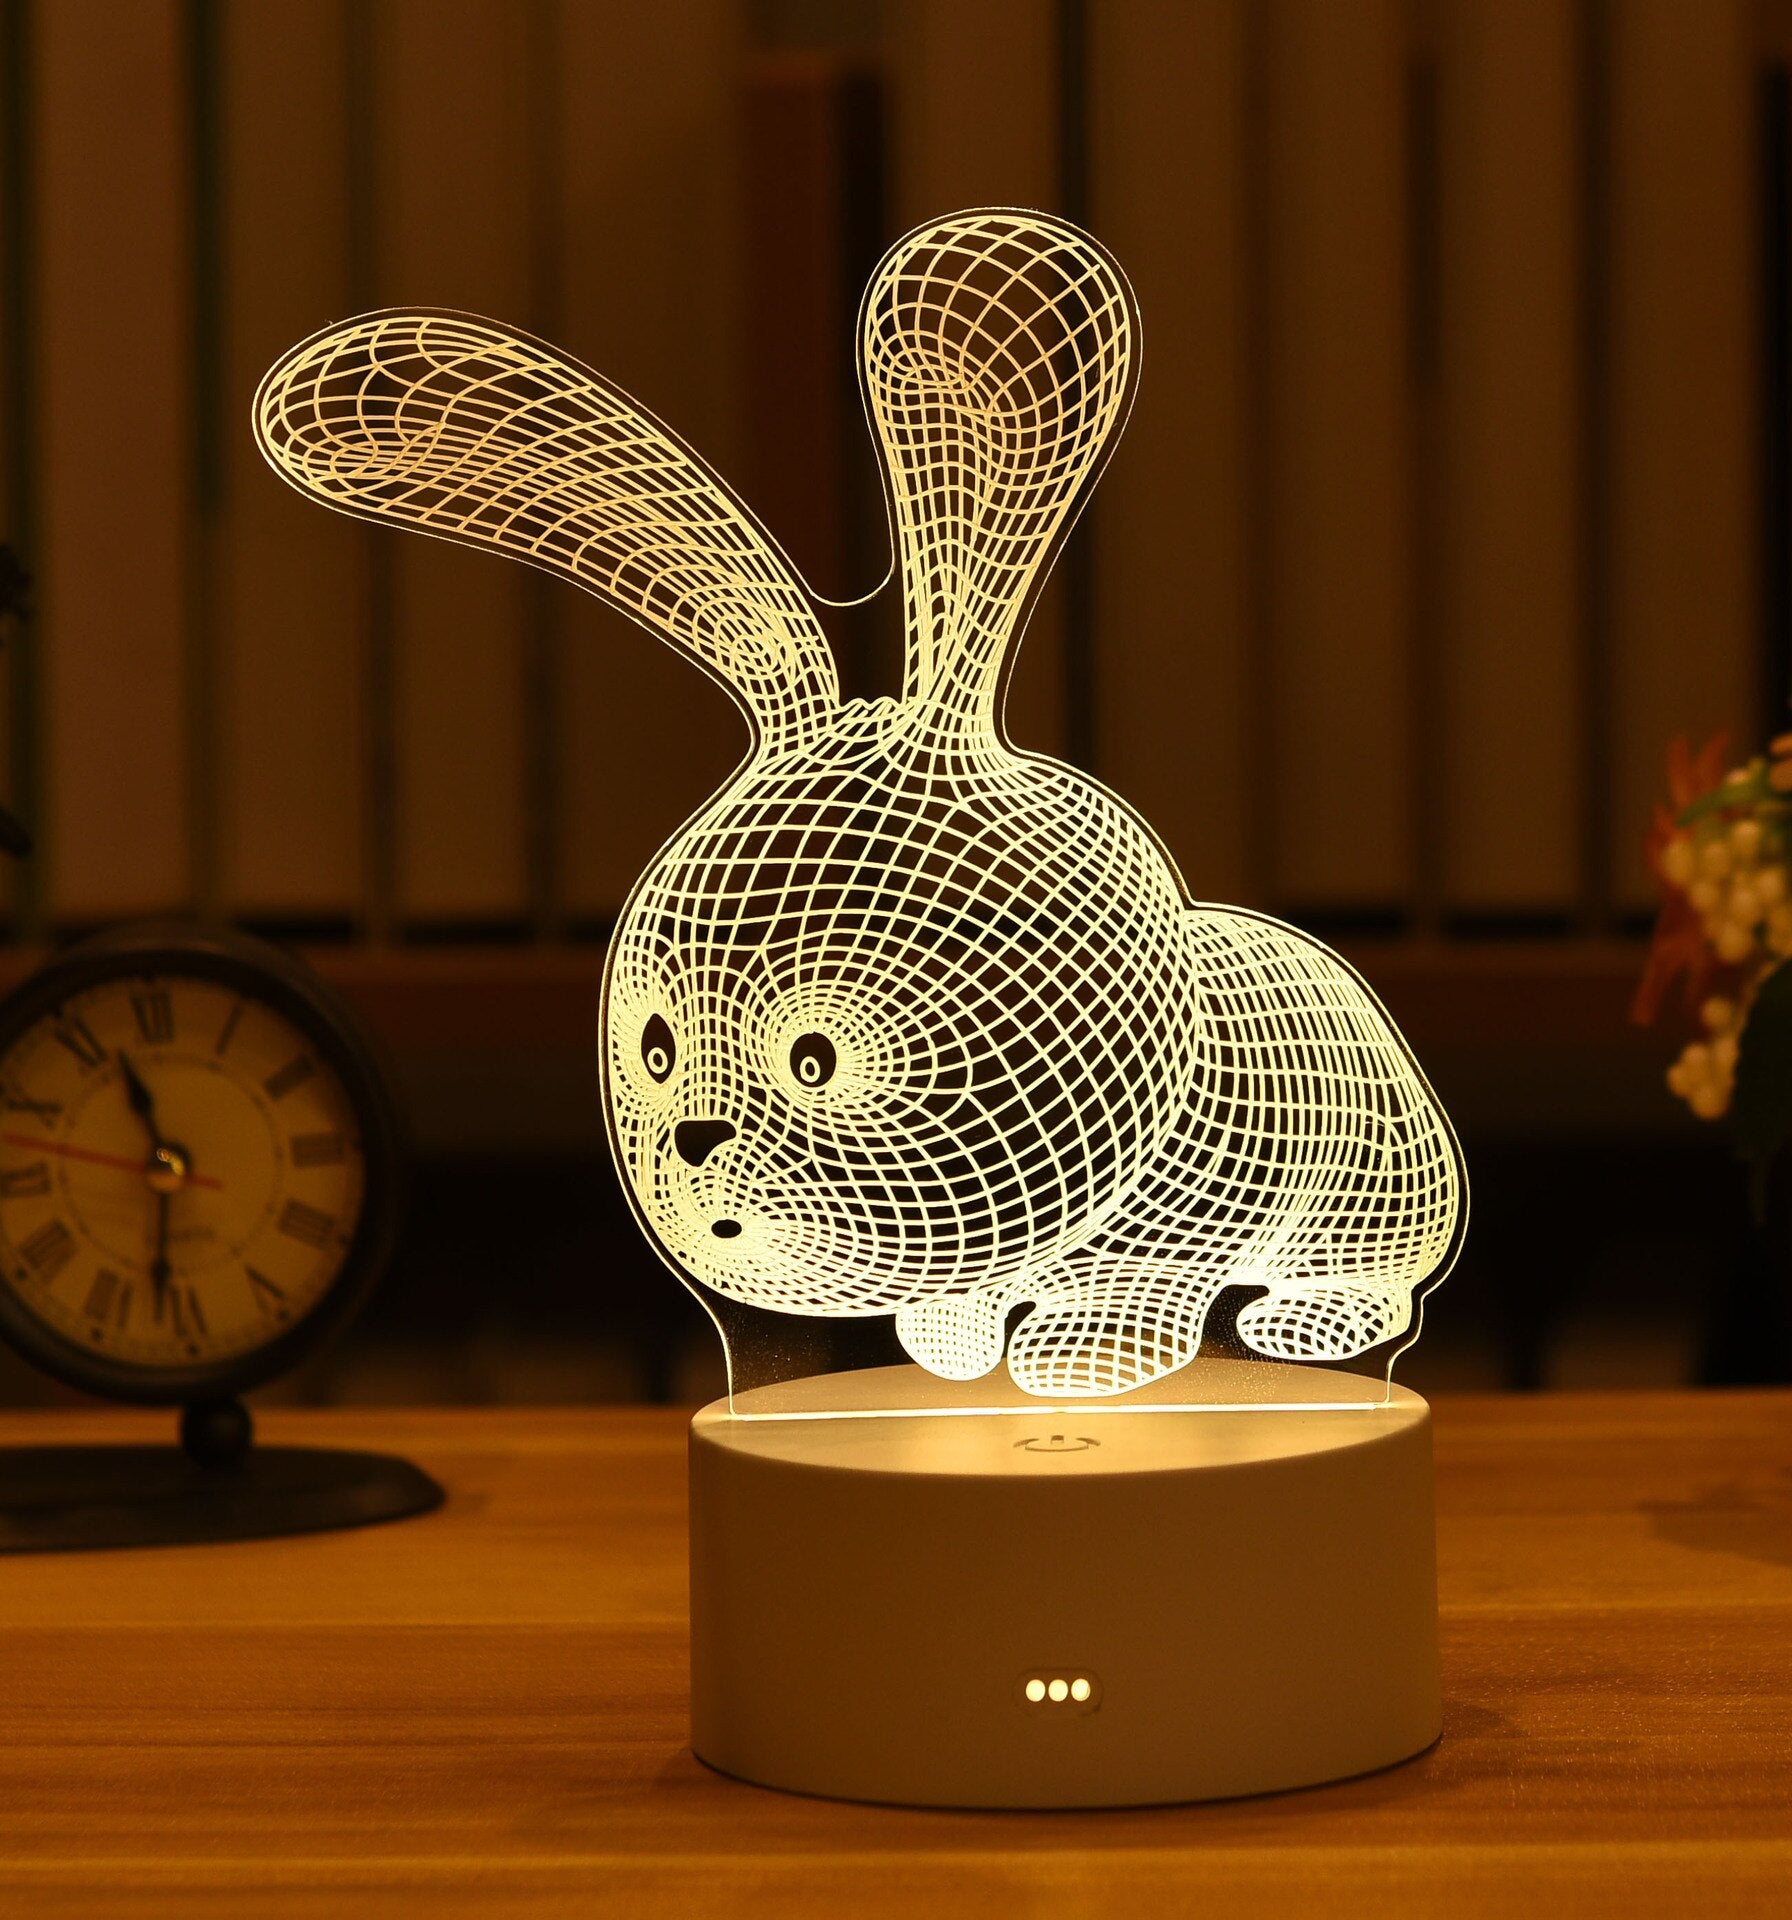 FSPGLS Taile Swei Fute Night Light,Taile Lamp 3D Illusion LED Desk Lamp,Acrylic USB Lights for Room Decor Merchandise,Party Decorations Kids Lamp,Birthday